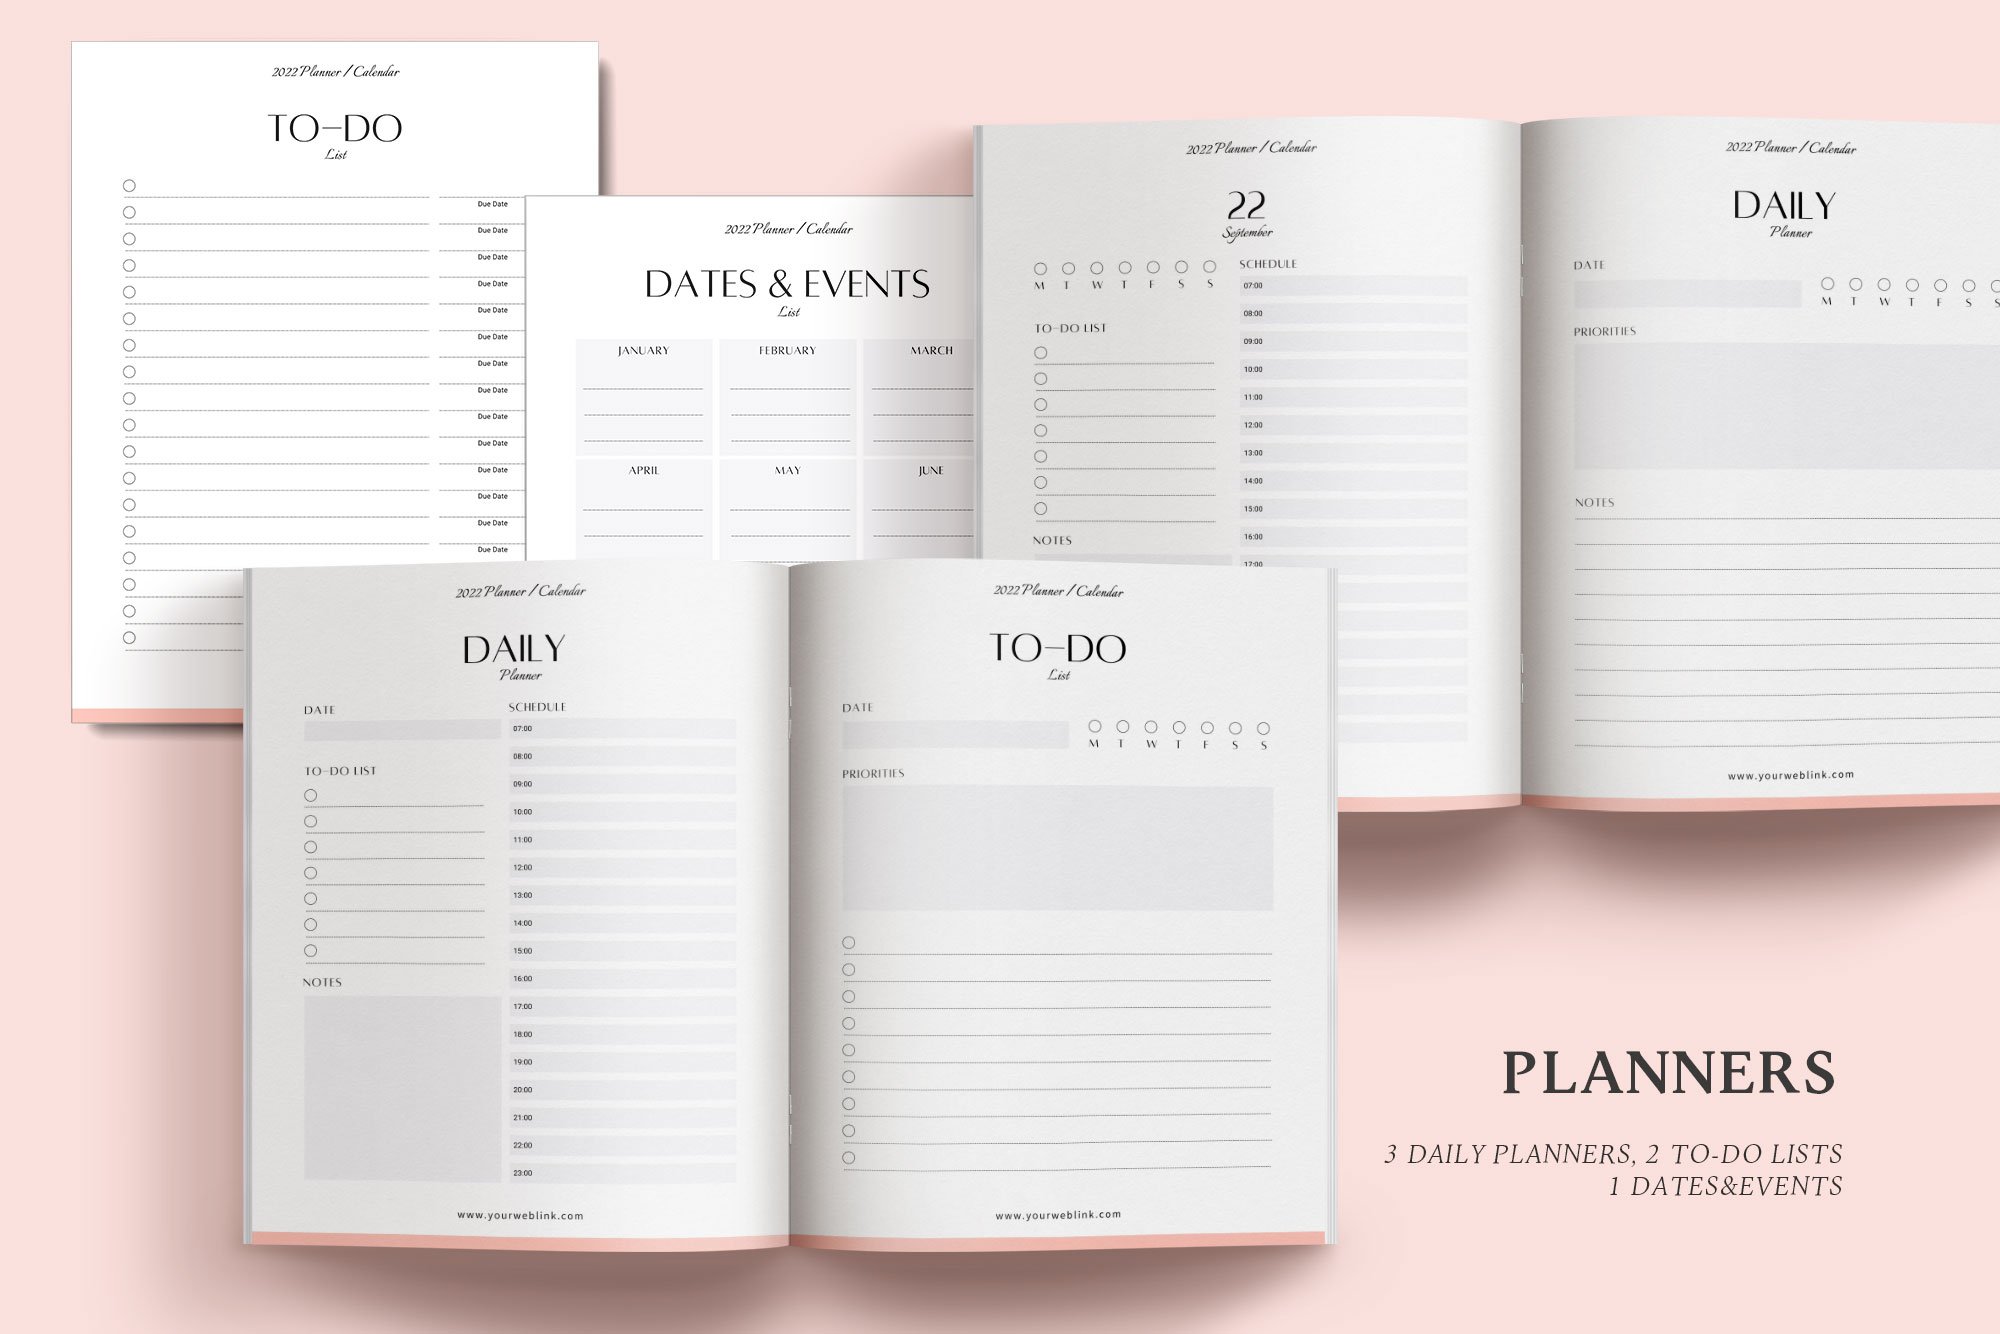 Nice planner collection.